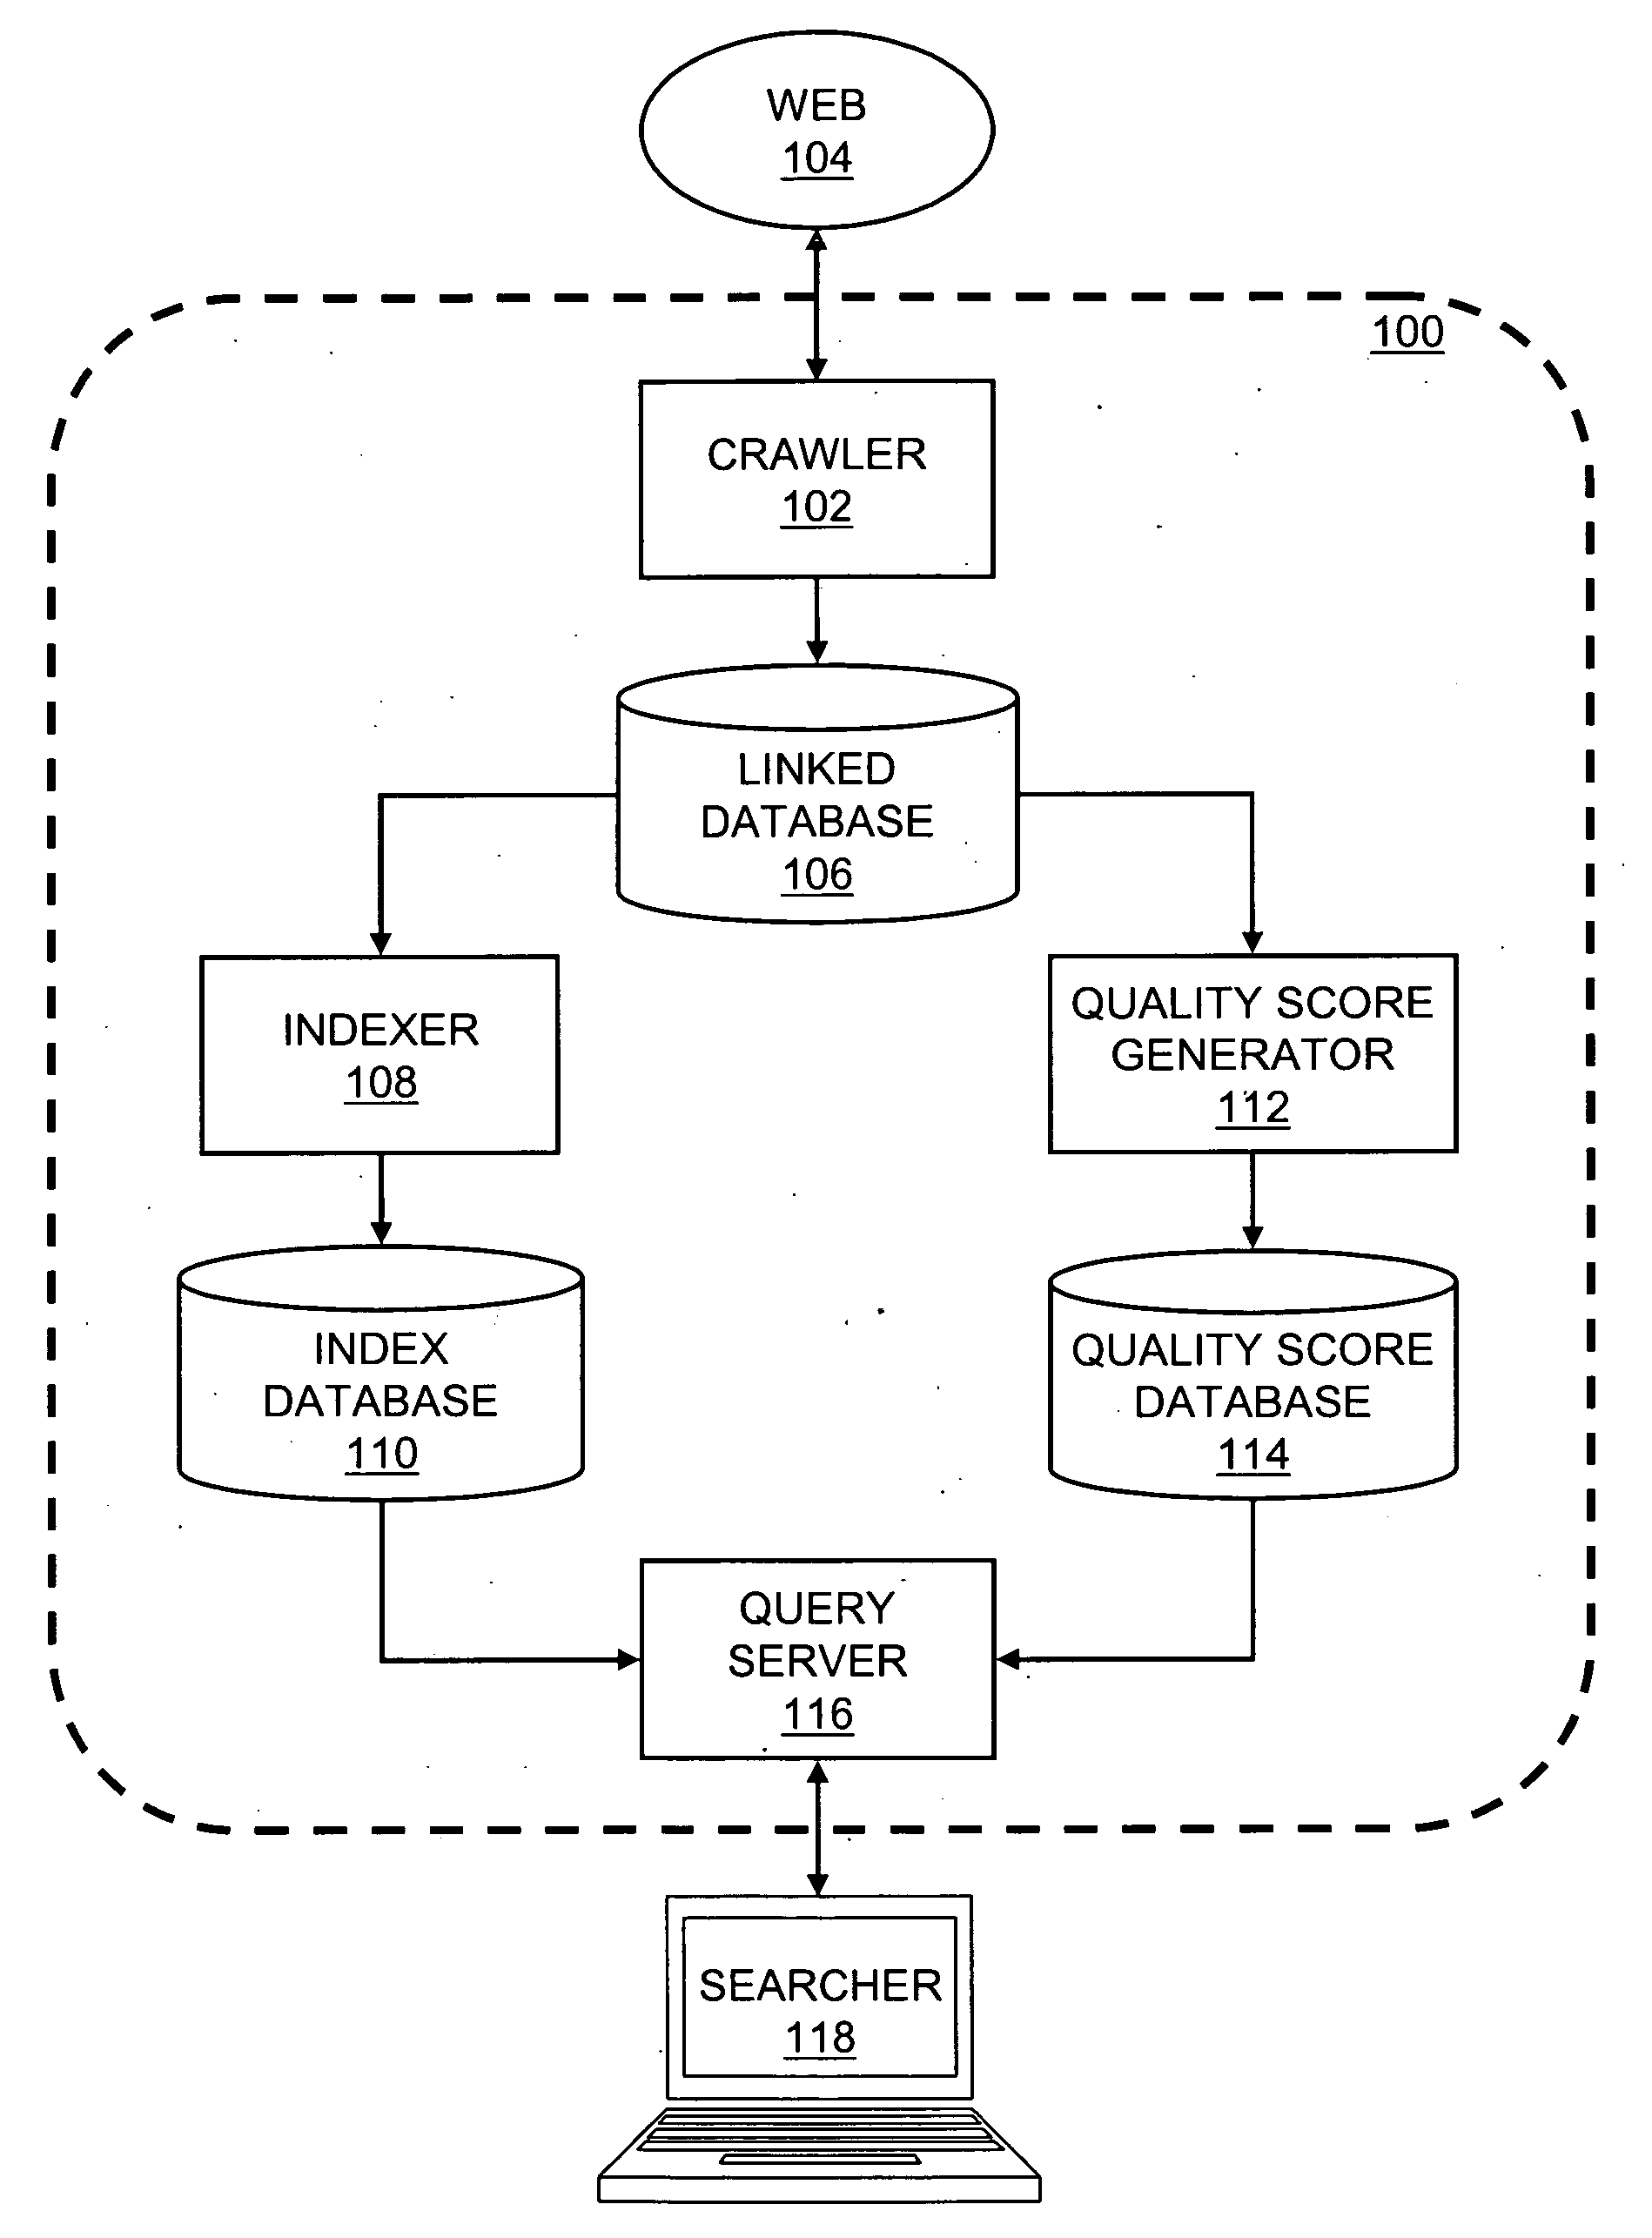 Method for assigning quality scores to documents in a linked database